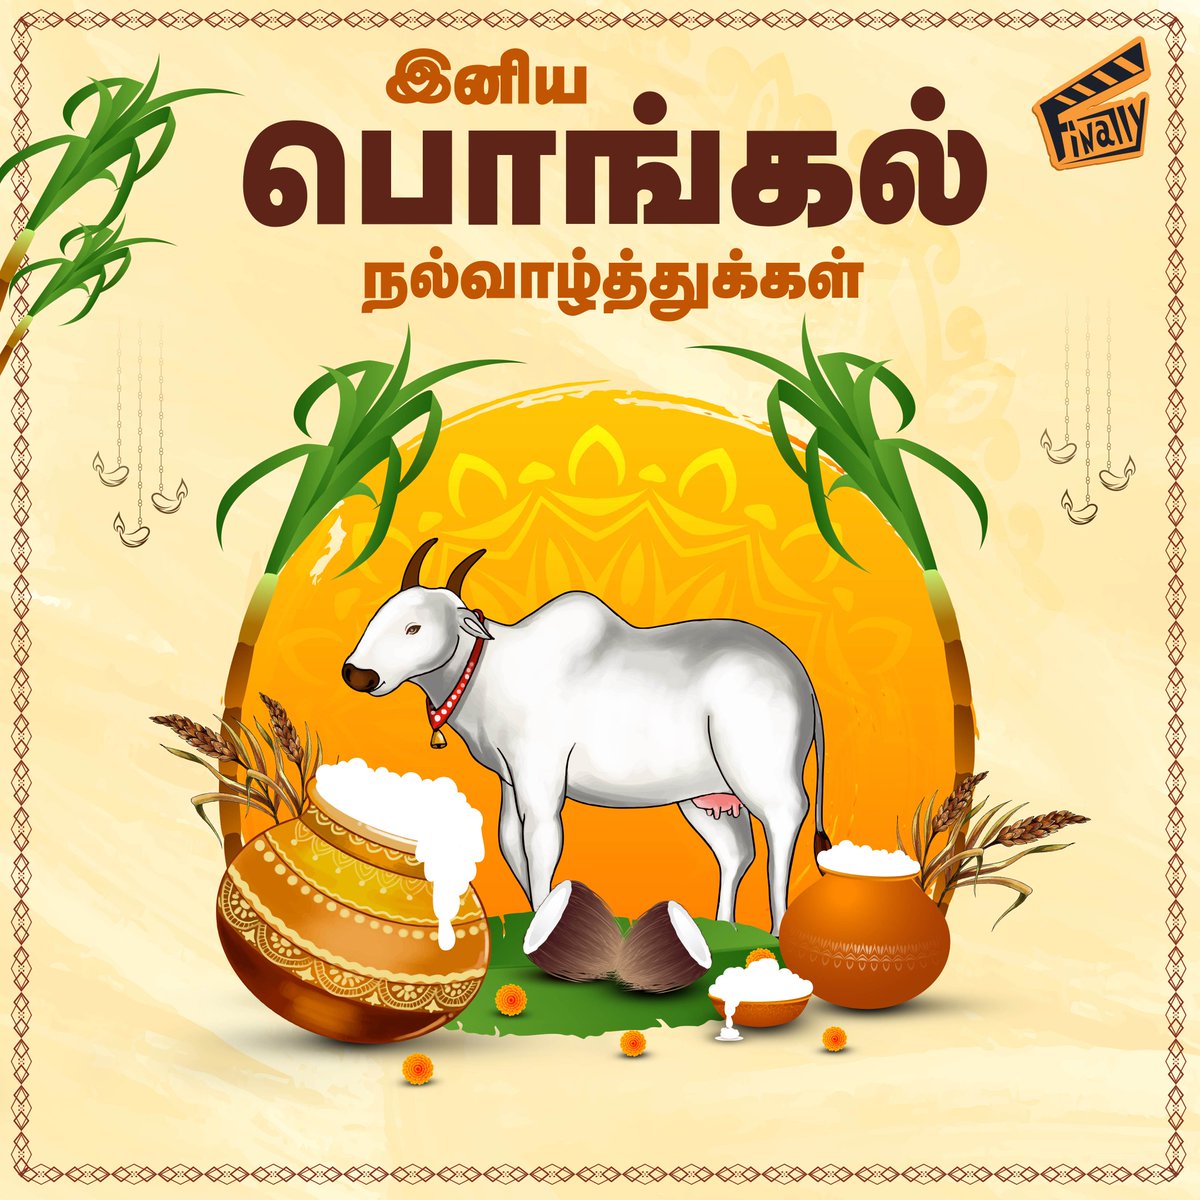 Happy Pongal! May the harvest festival fill your home with joy, prosperity, and boundless happiness. ❤️ @FinallyBhaarath @NANDHAGOPALA #Pongal #தமிழர்திருநாள் #பொங்கல் #HappyPongal #Pongal2024 #PongalWishes